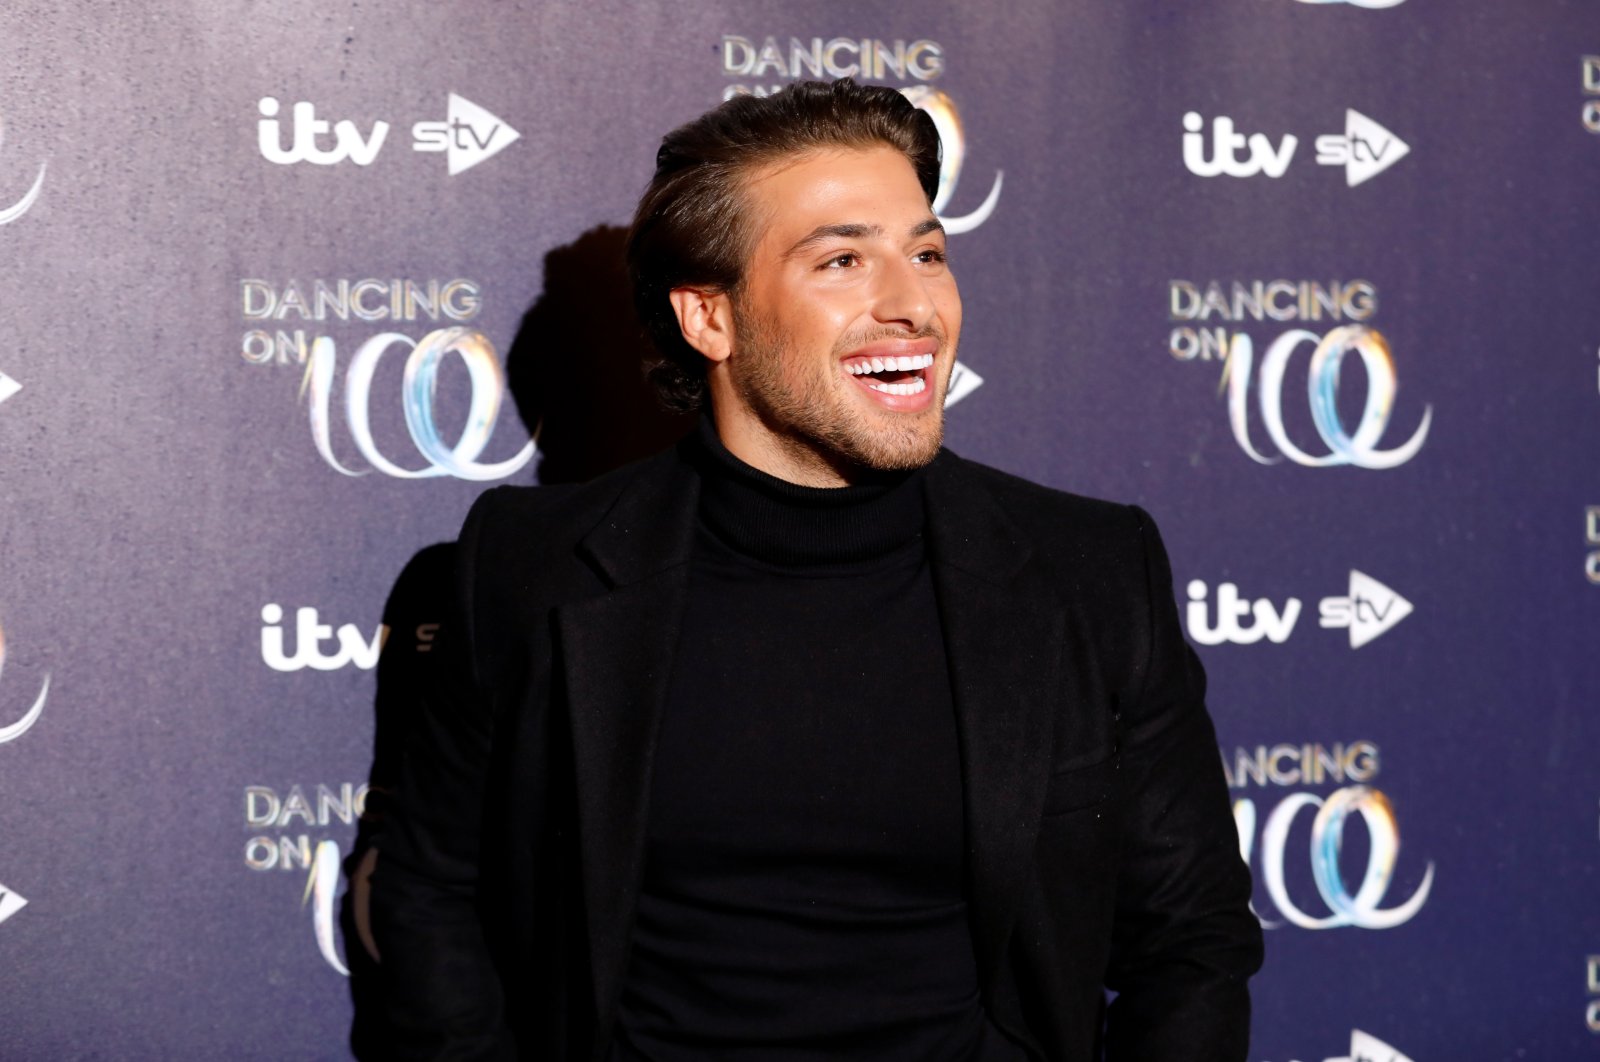 Kem Çetinay attends the press launch for the upcoming series of Dancing On Ice at the Natural History Museum in Kensington, London, Dec. 18, 2018. (Getty Images) 